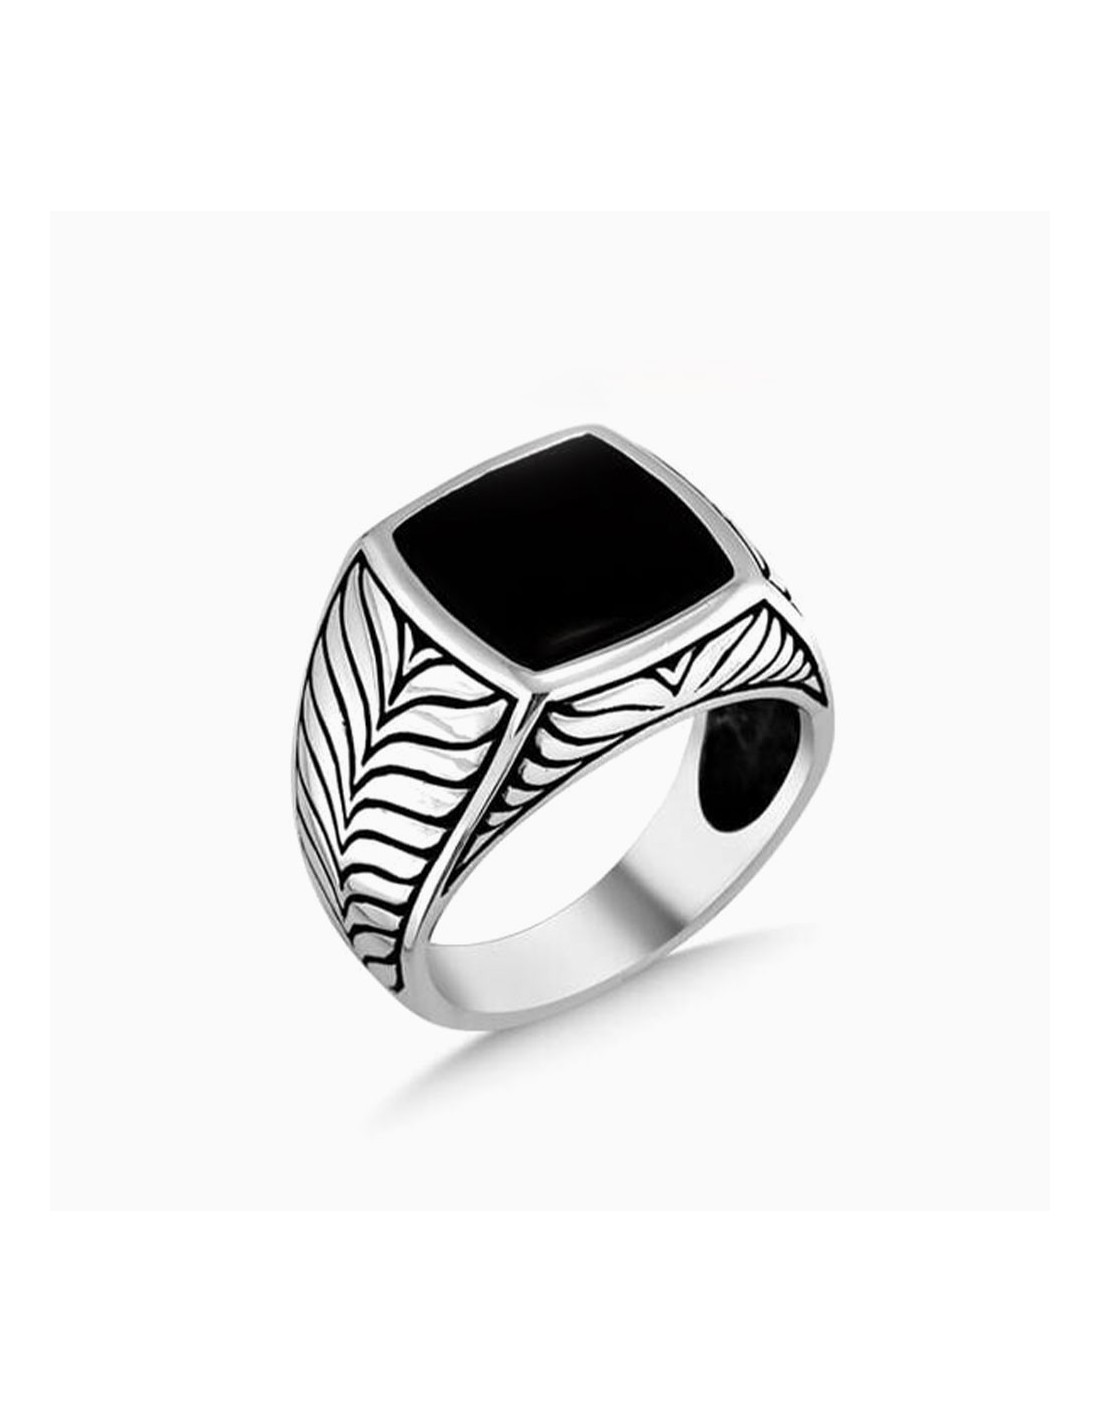 Silver Men's Ring with Black Onyx Stone